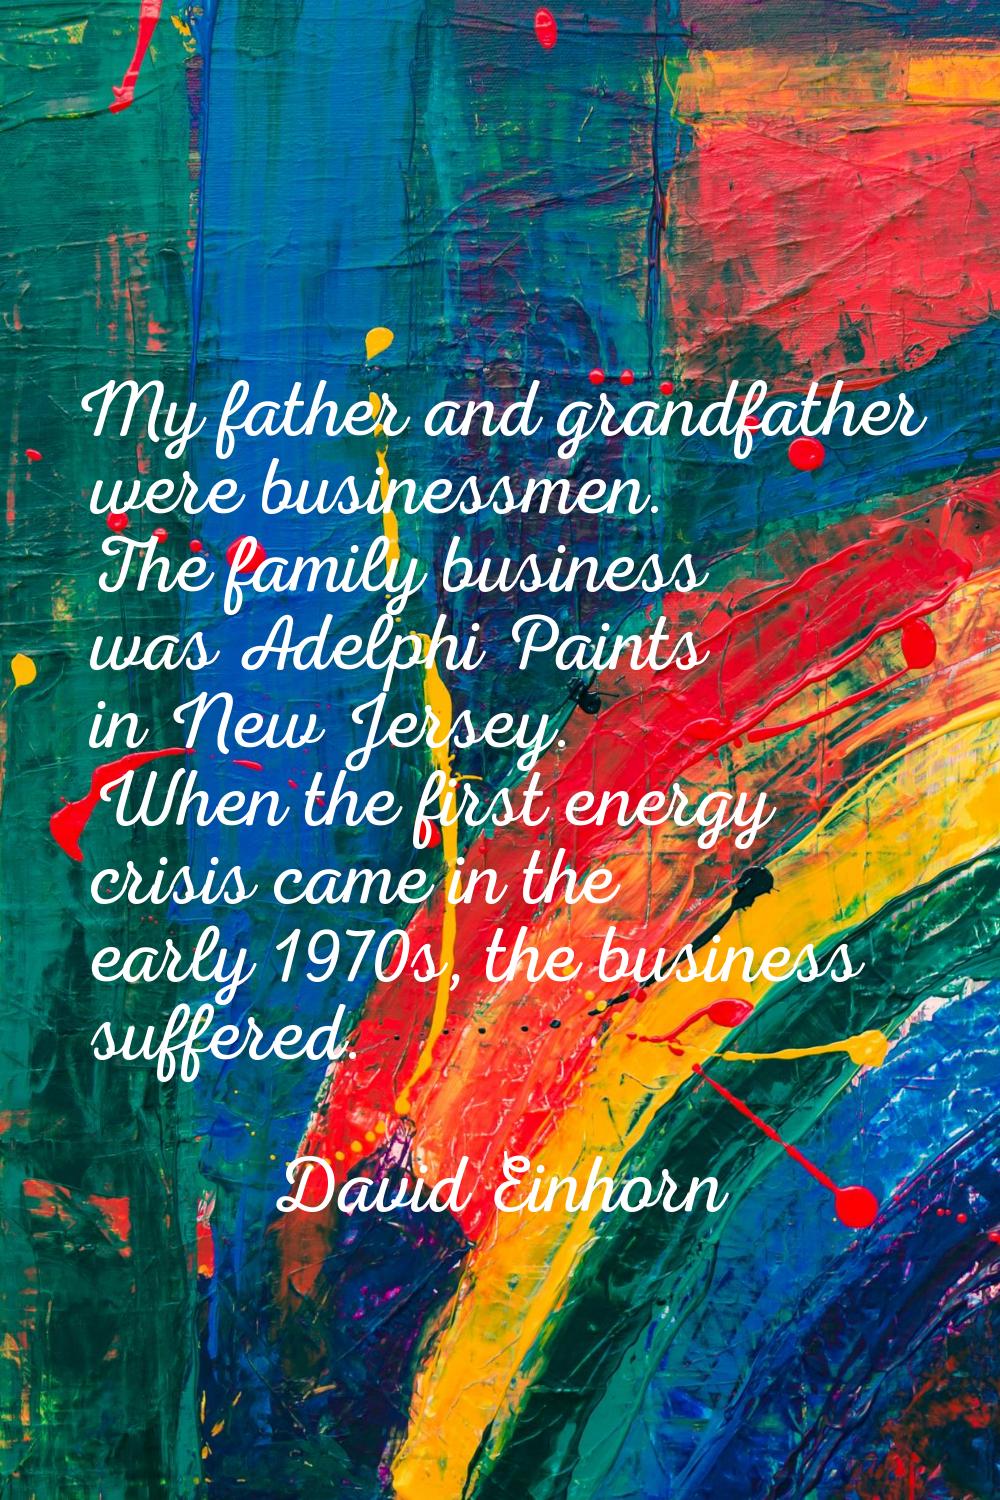 My father and grandfather were businessmen. The family business was Adelphi Paints in New Jersey. W